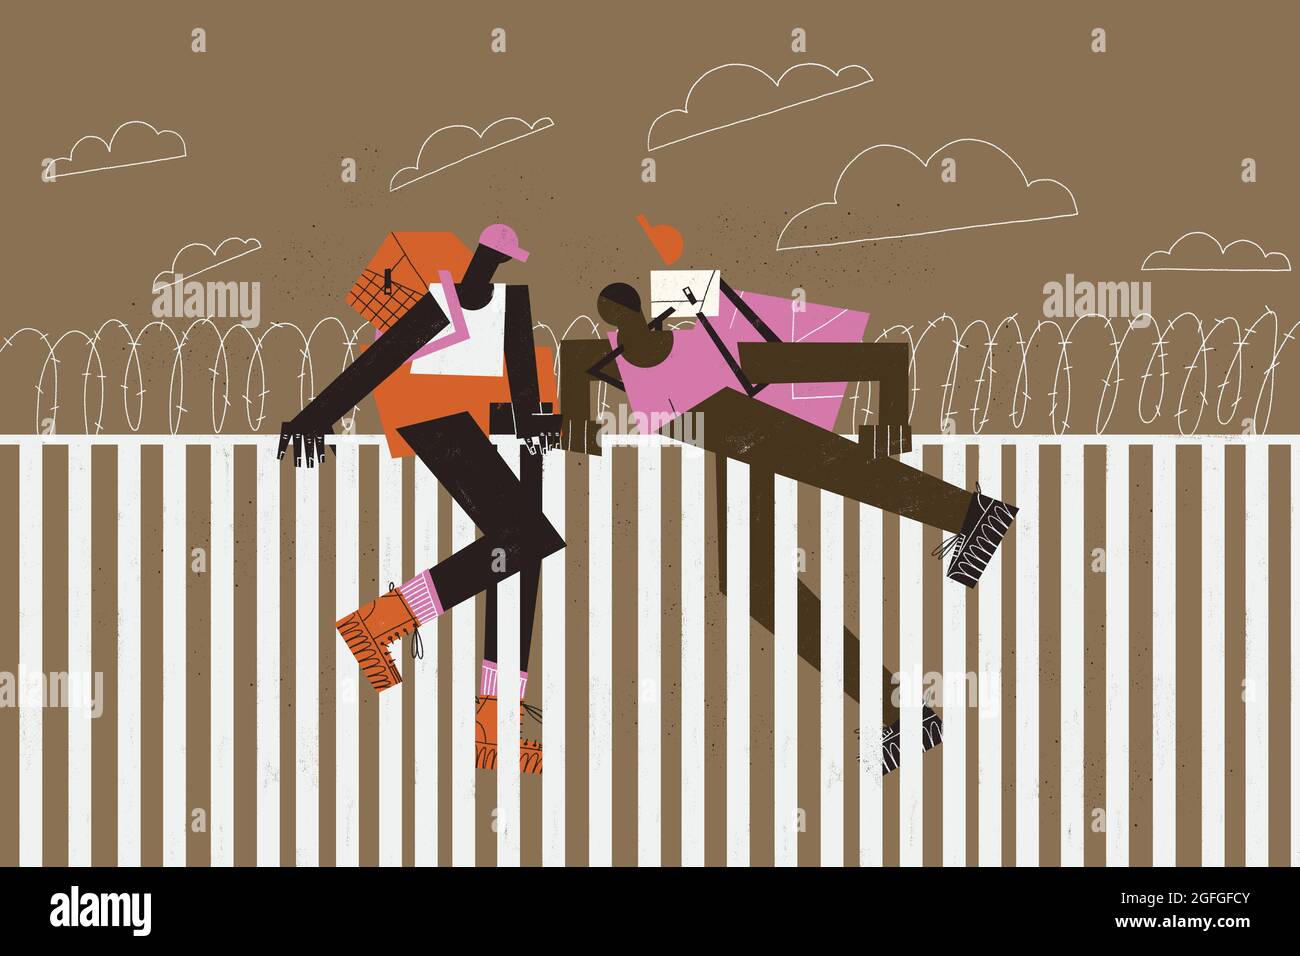 Mother and son refugees’ migrants trying to leap over the wall and barbed wire. Migrant drama illustration. Stock Photo